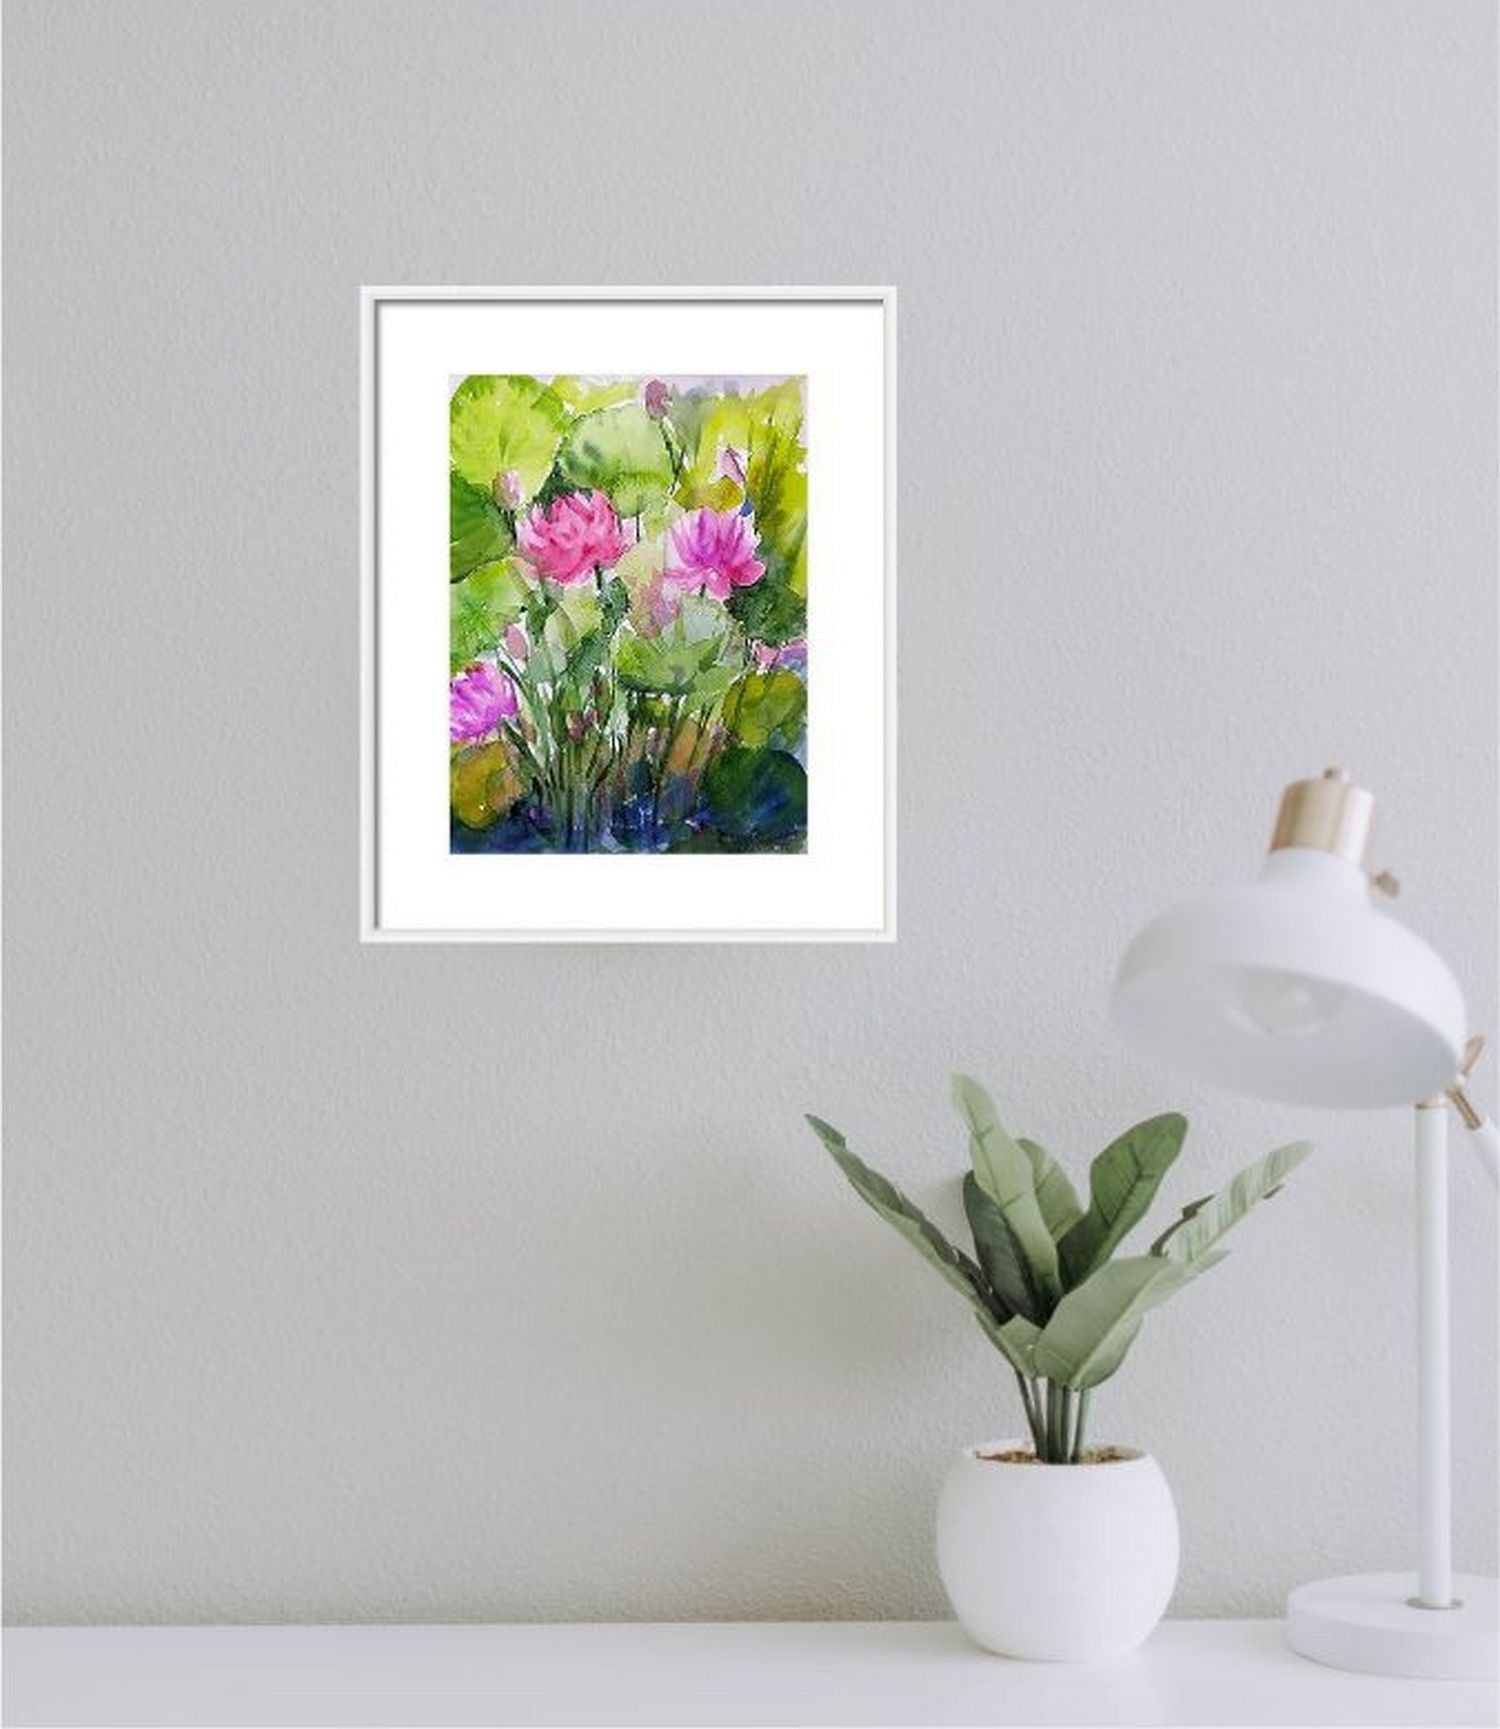 A Pink Lotus Pond, watercolor art in a virtual frame in a virtual setting